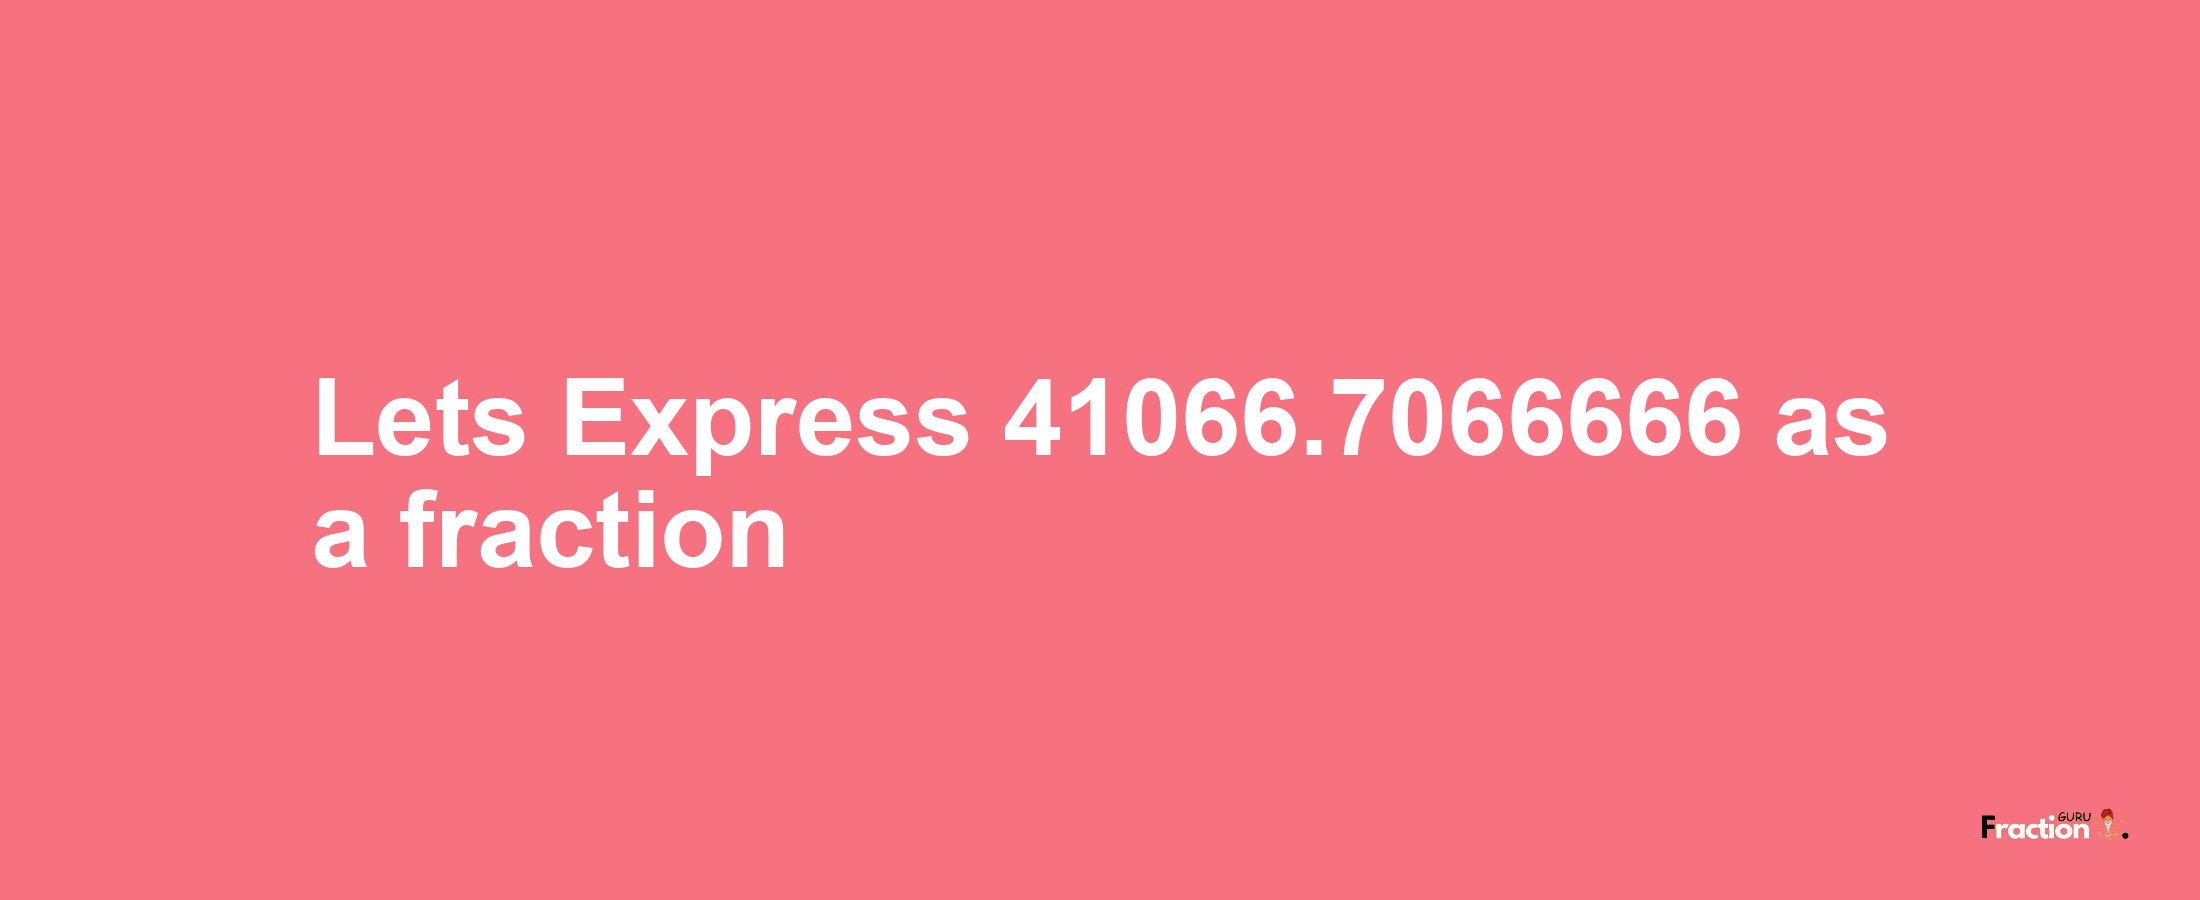 Lets Express 41066.7066666 as afraction